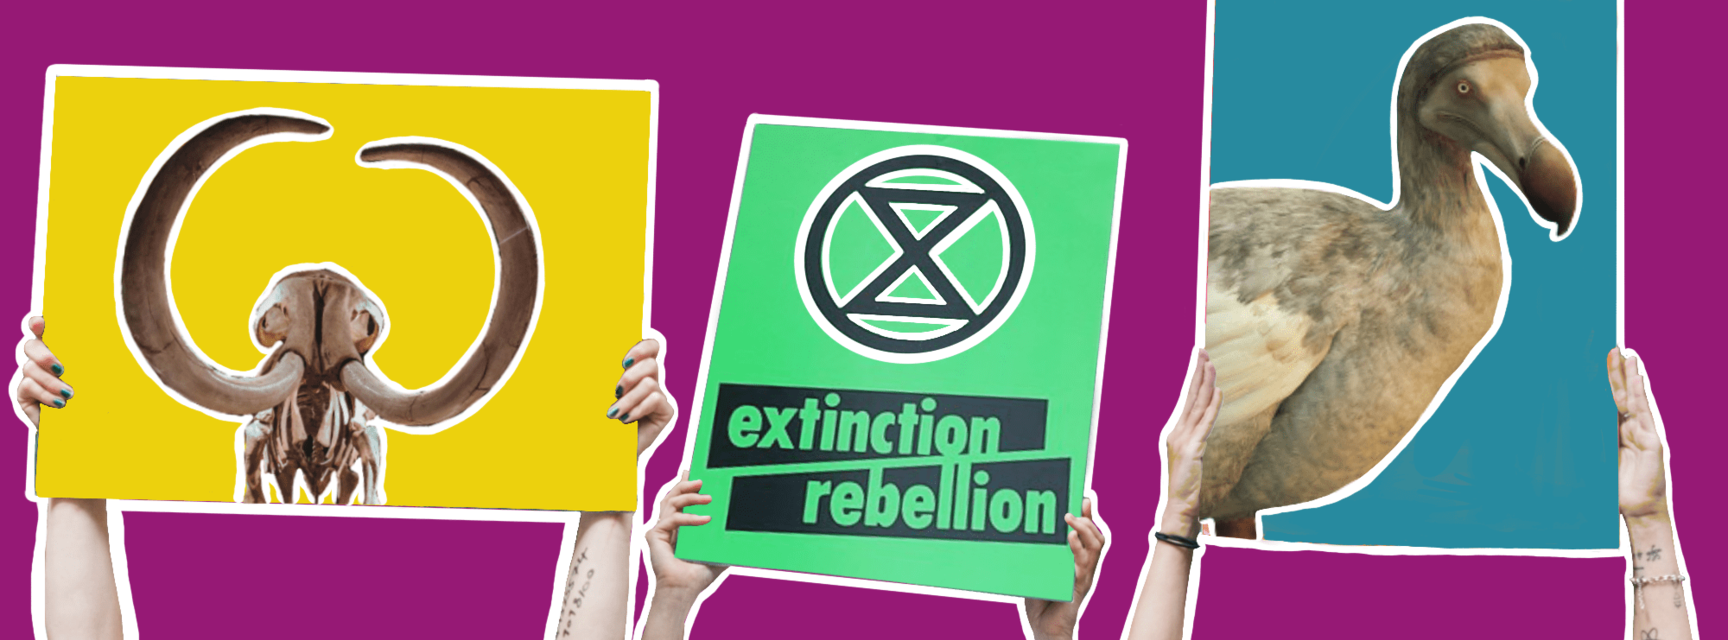 Some protestors' hands holding up signs with a mastodon, dodo, and extinction rebellion logo